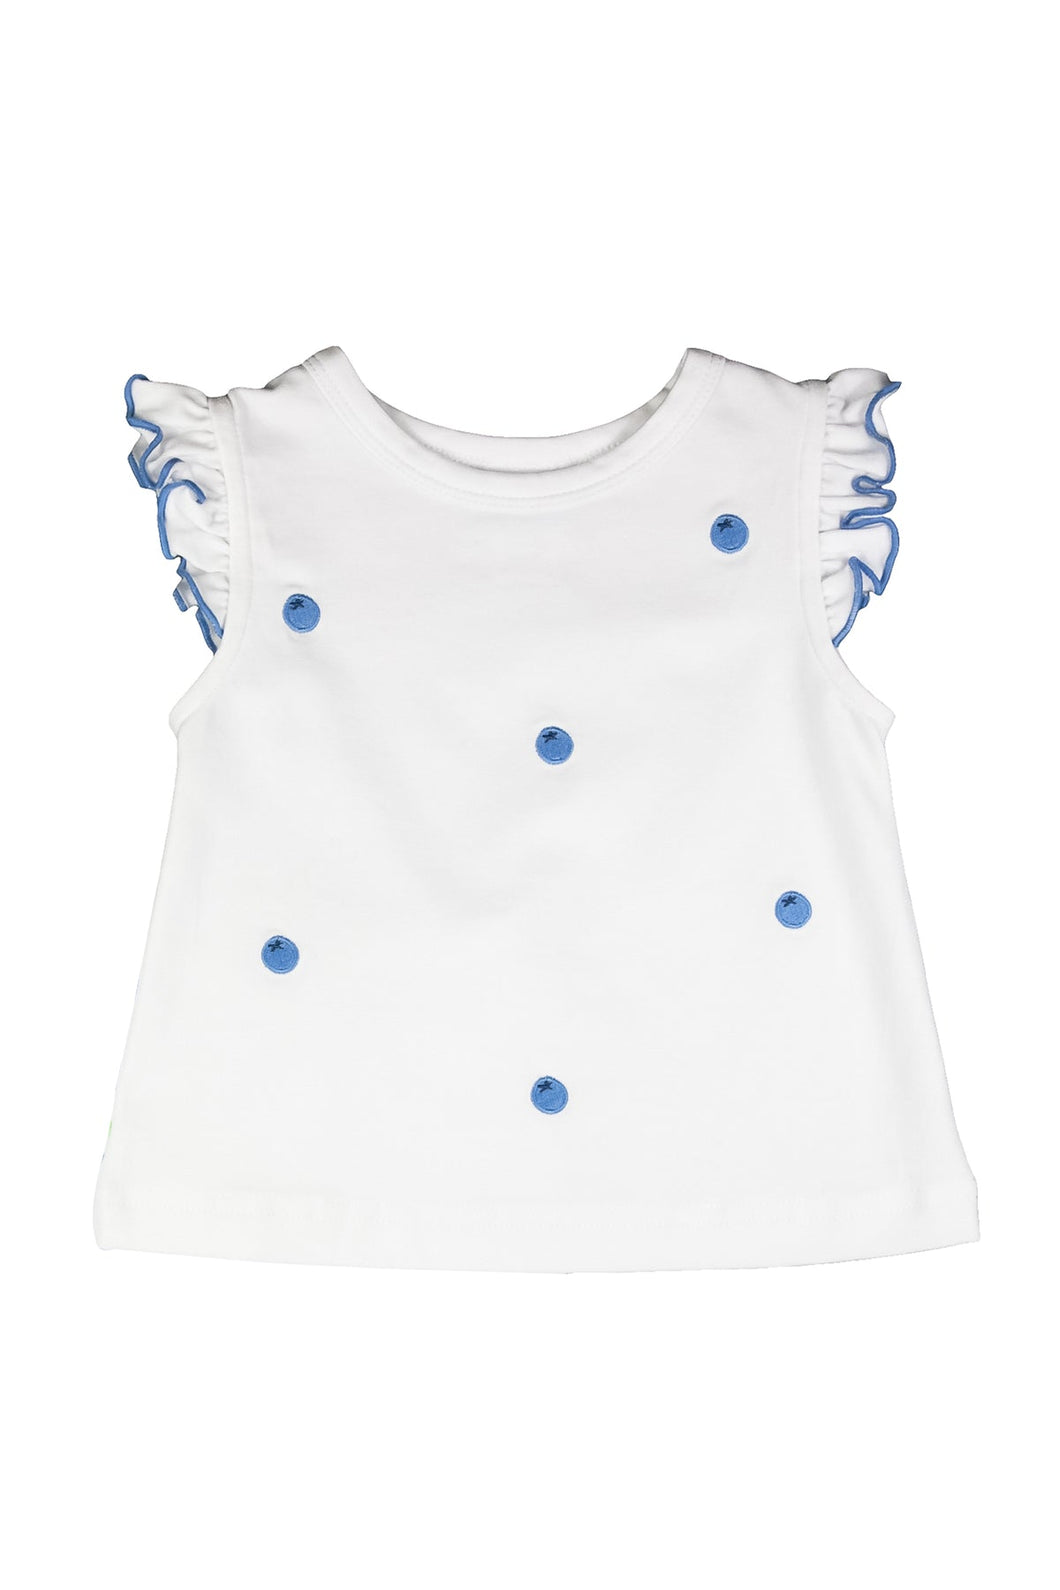 White Sleeveless Top with Blueberries